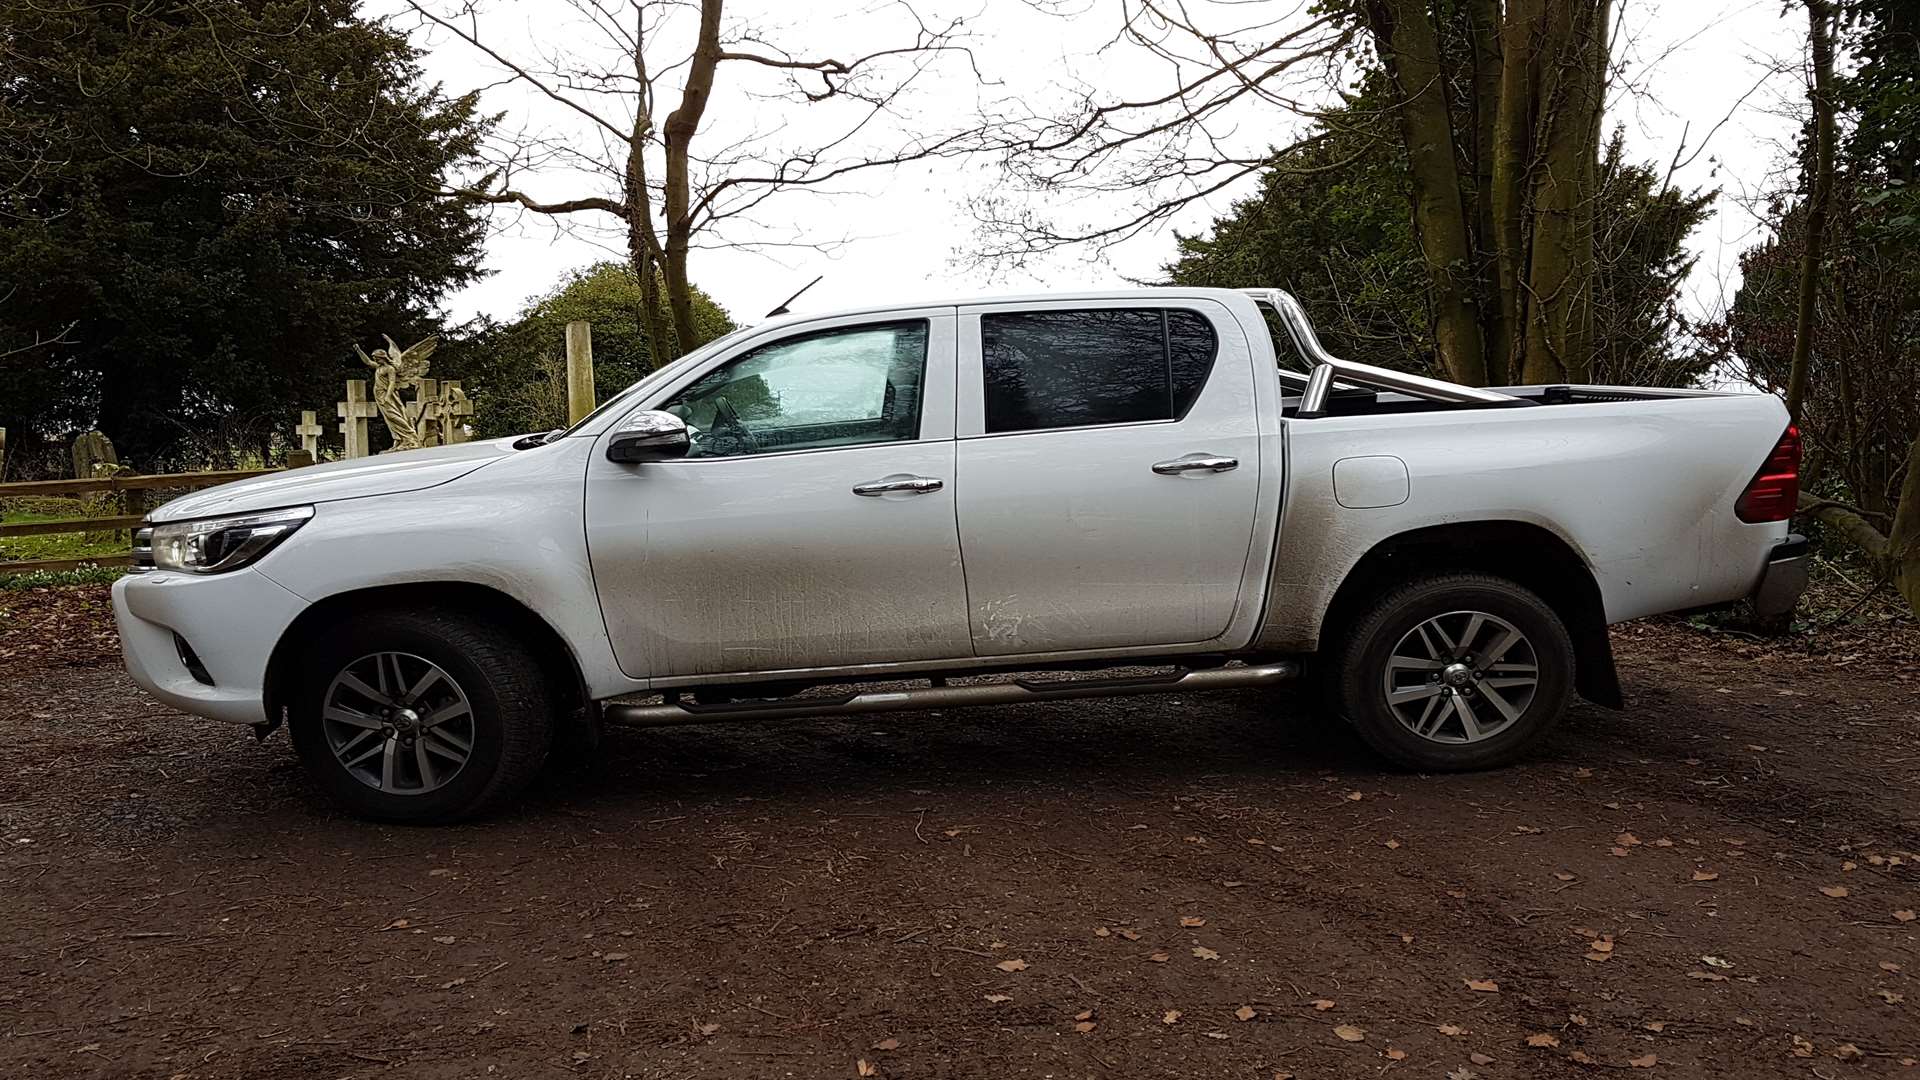 Despite its size, the Hilux is surprisingly easy to manoeuvre